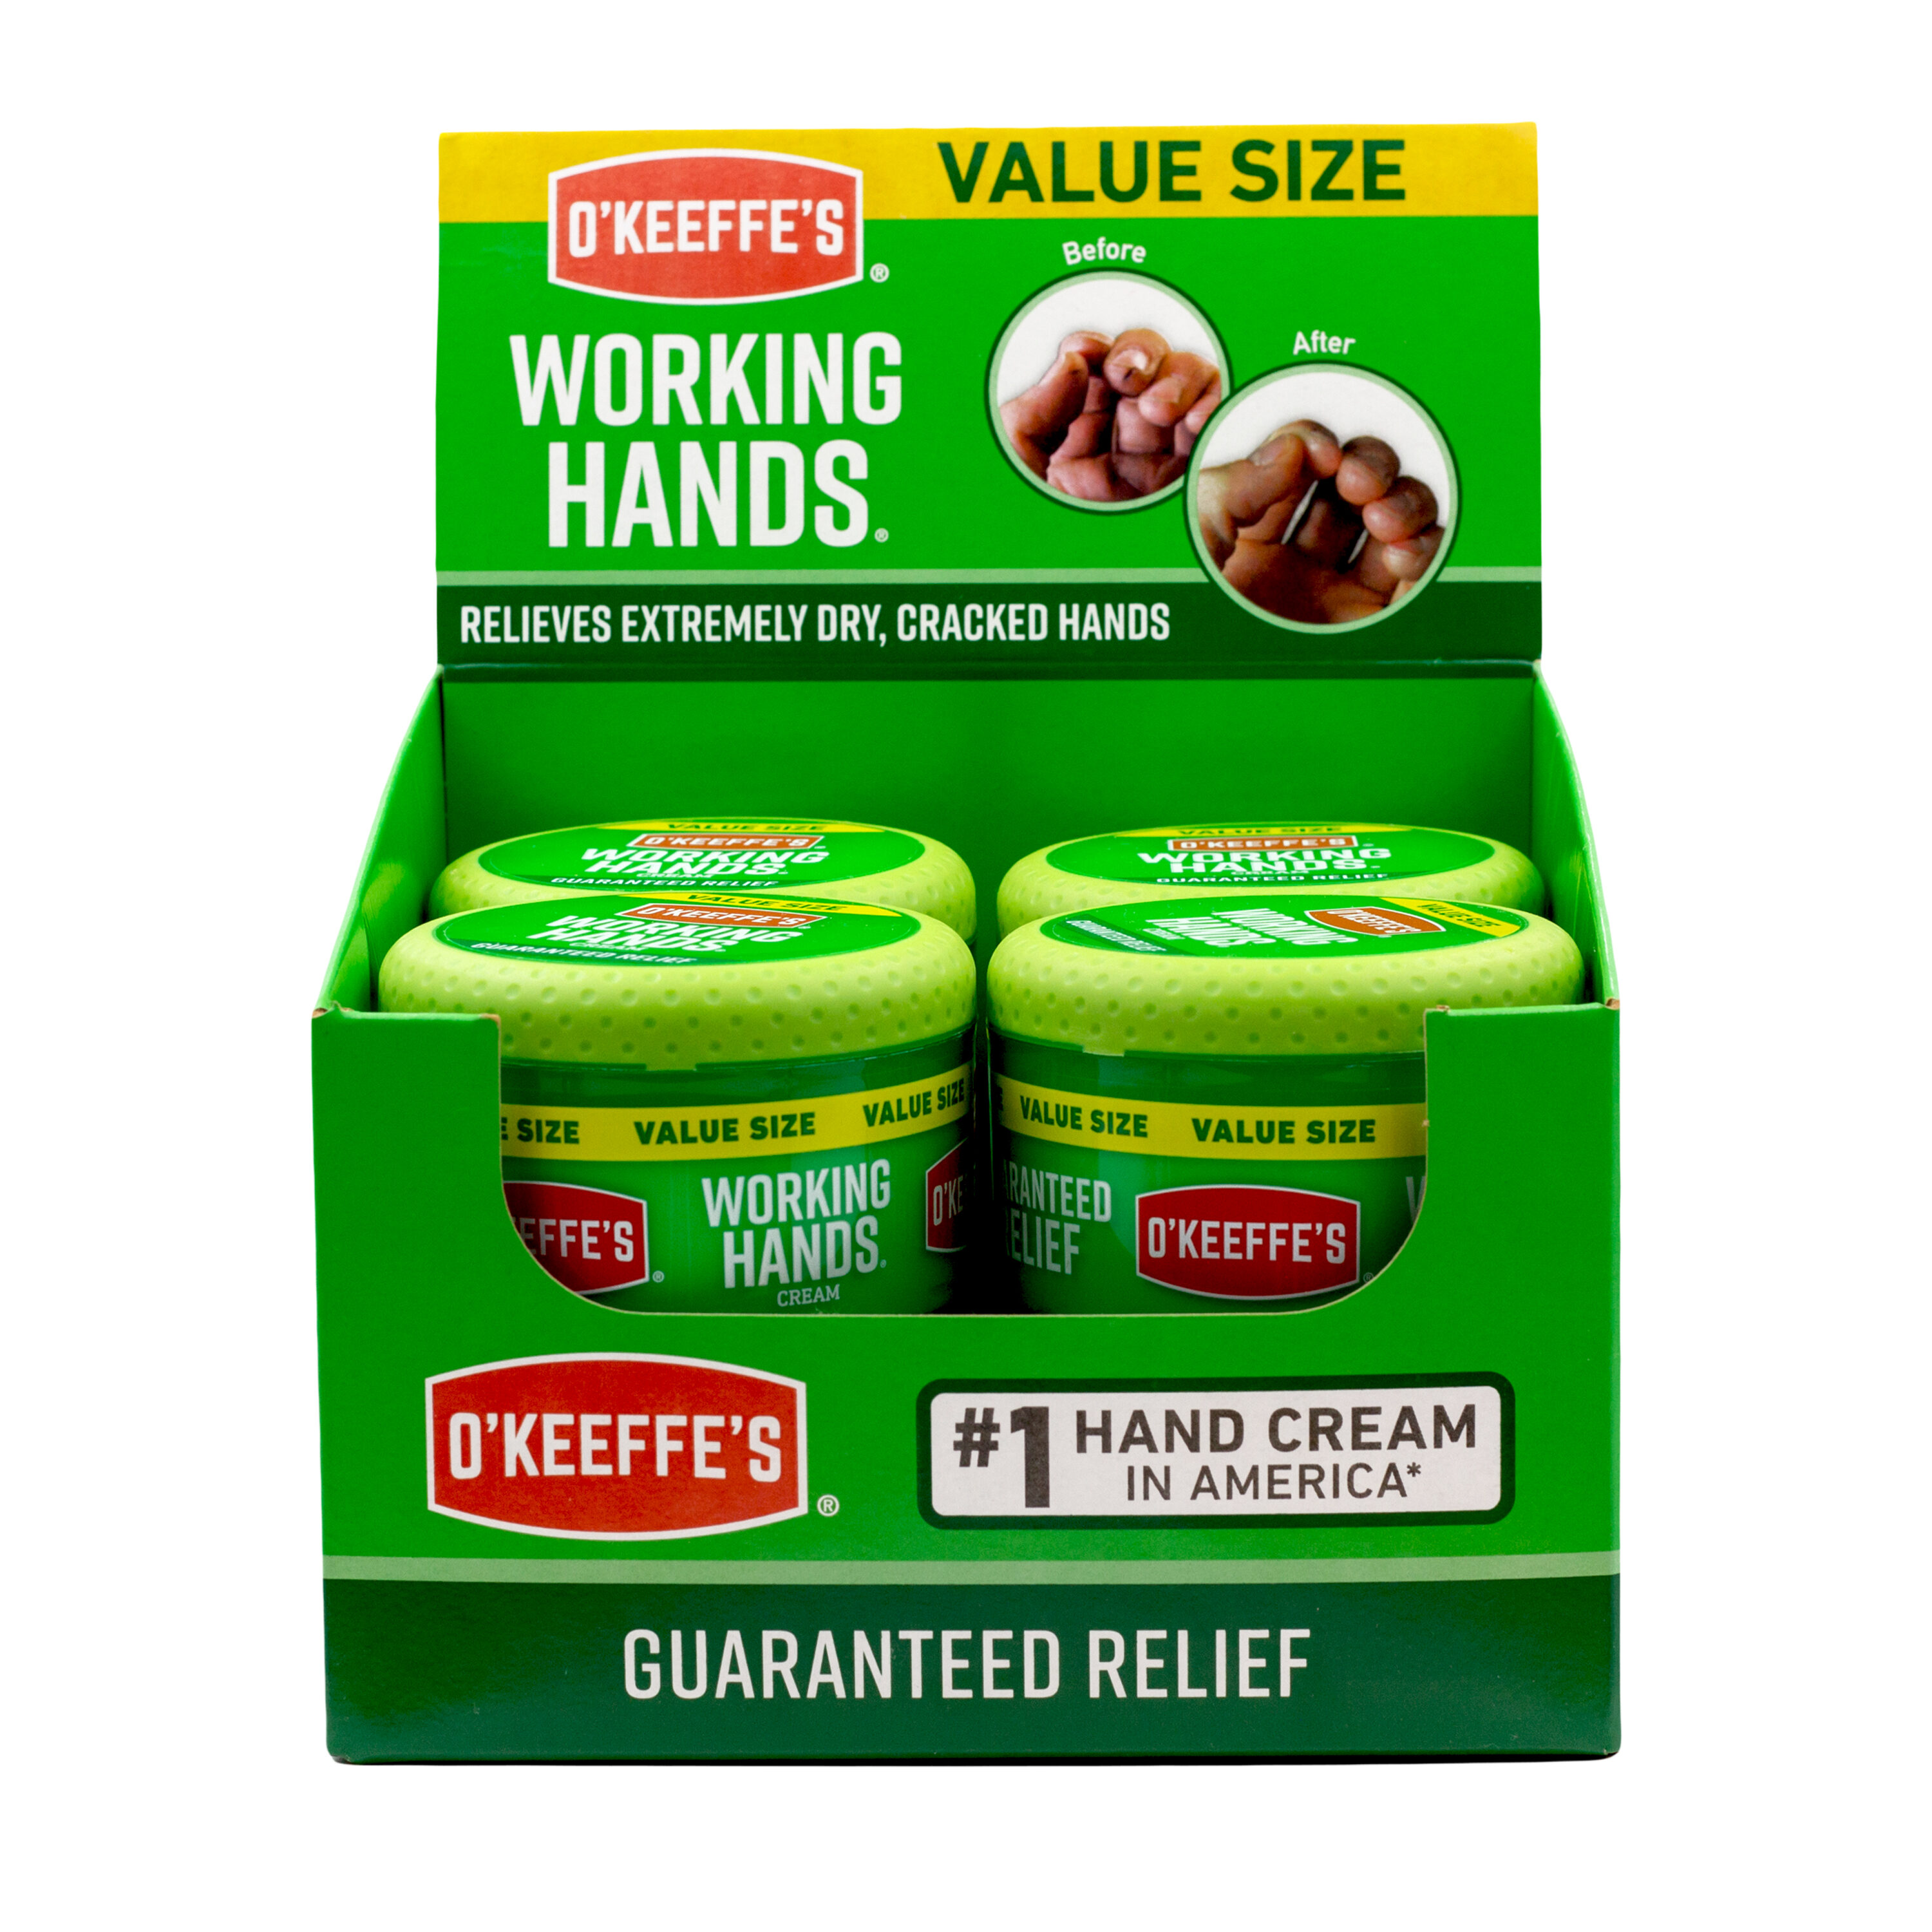 O'Keeffe's Working Hands Hand Cream review 